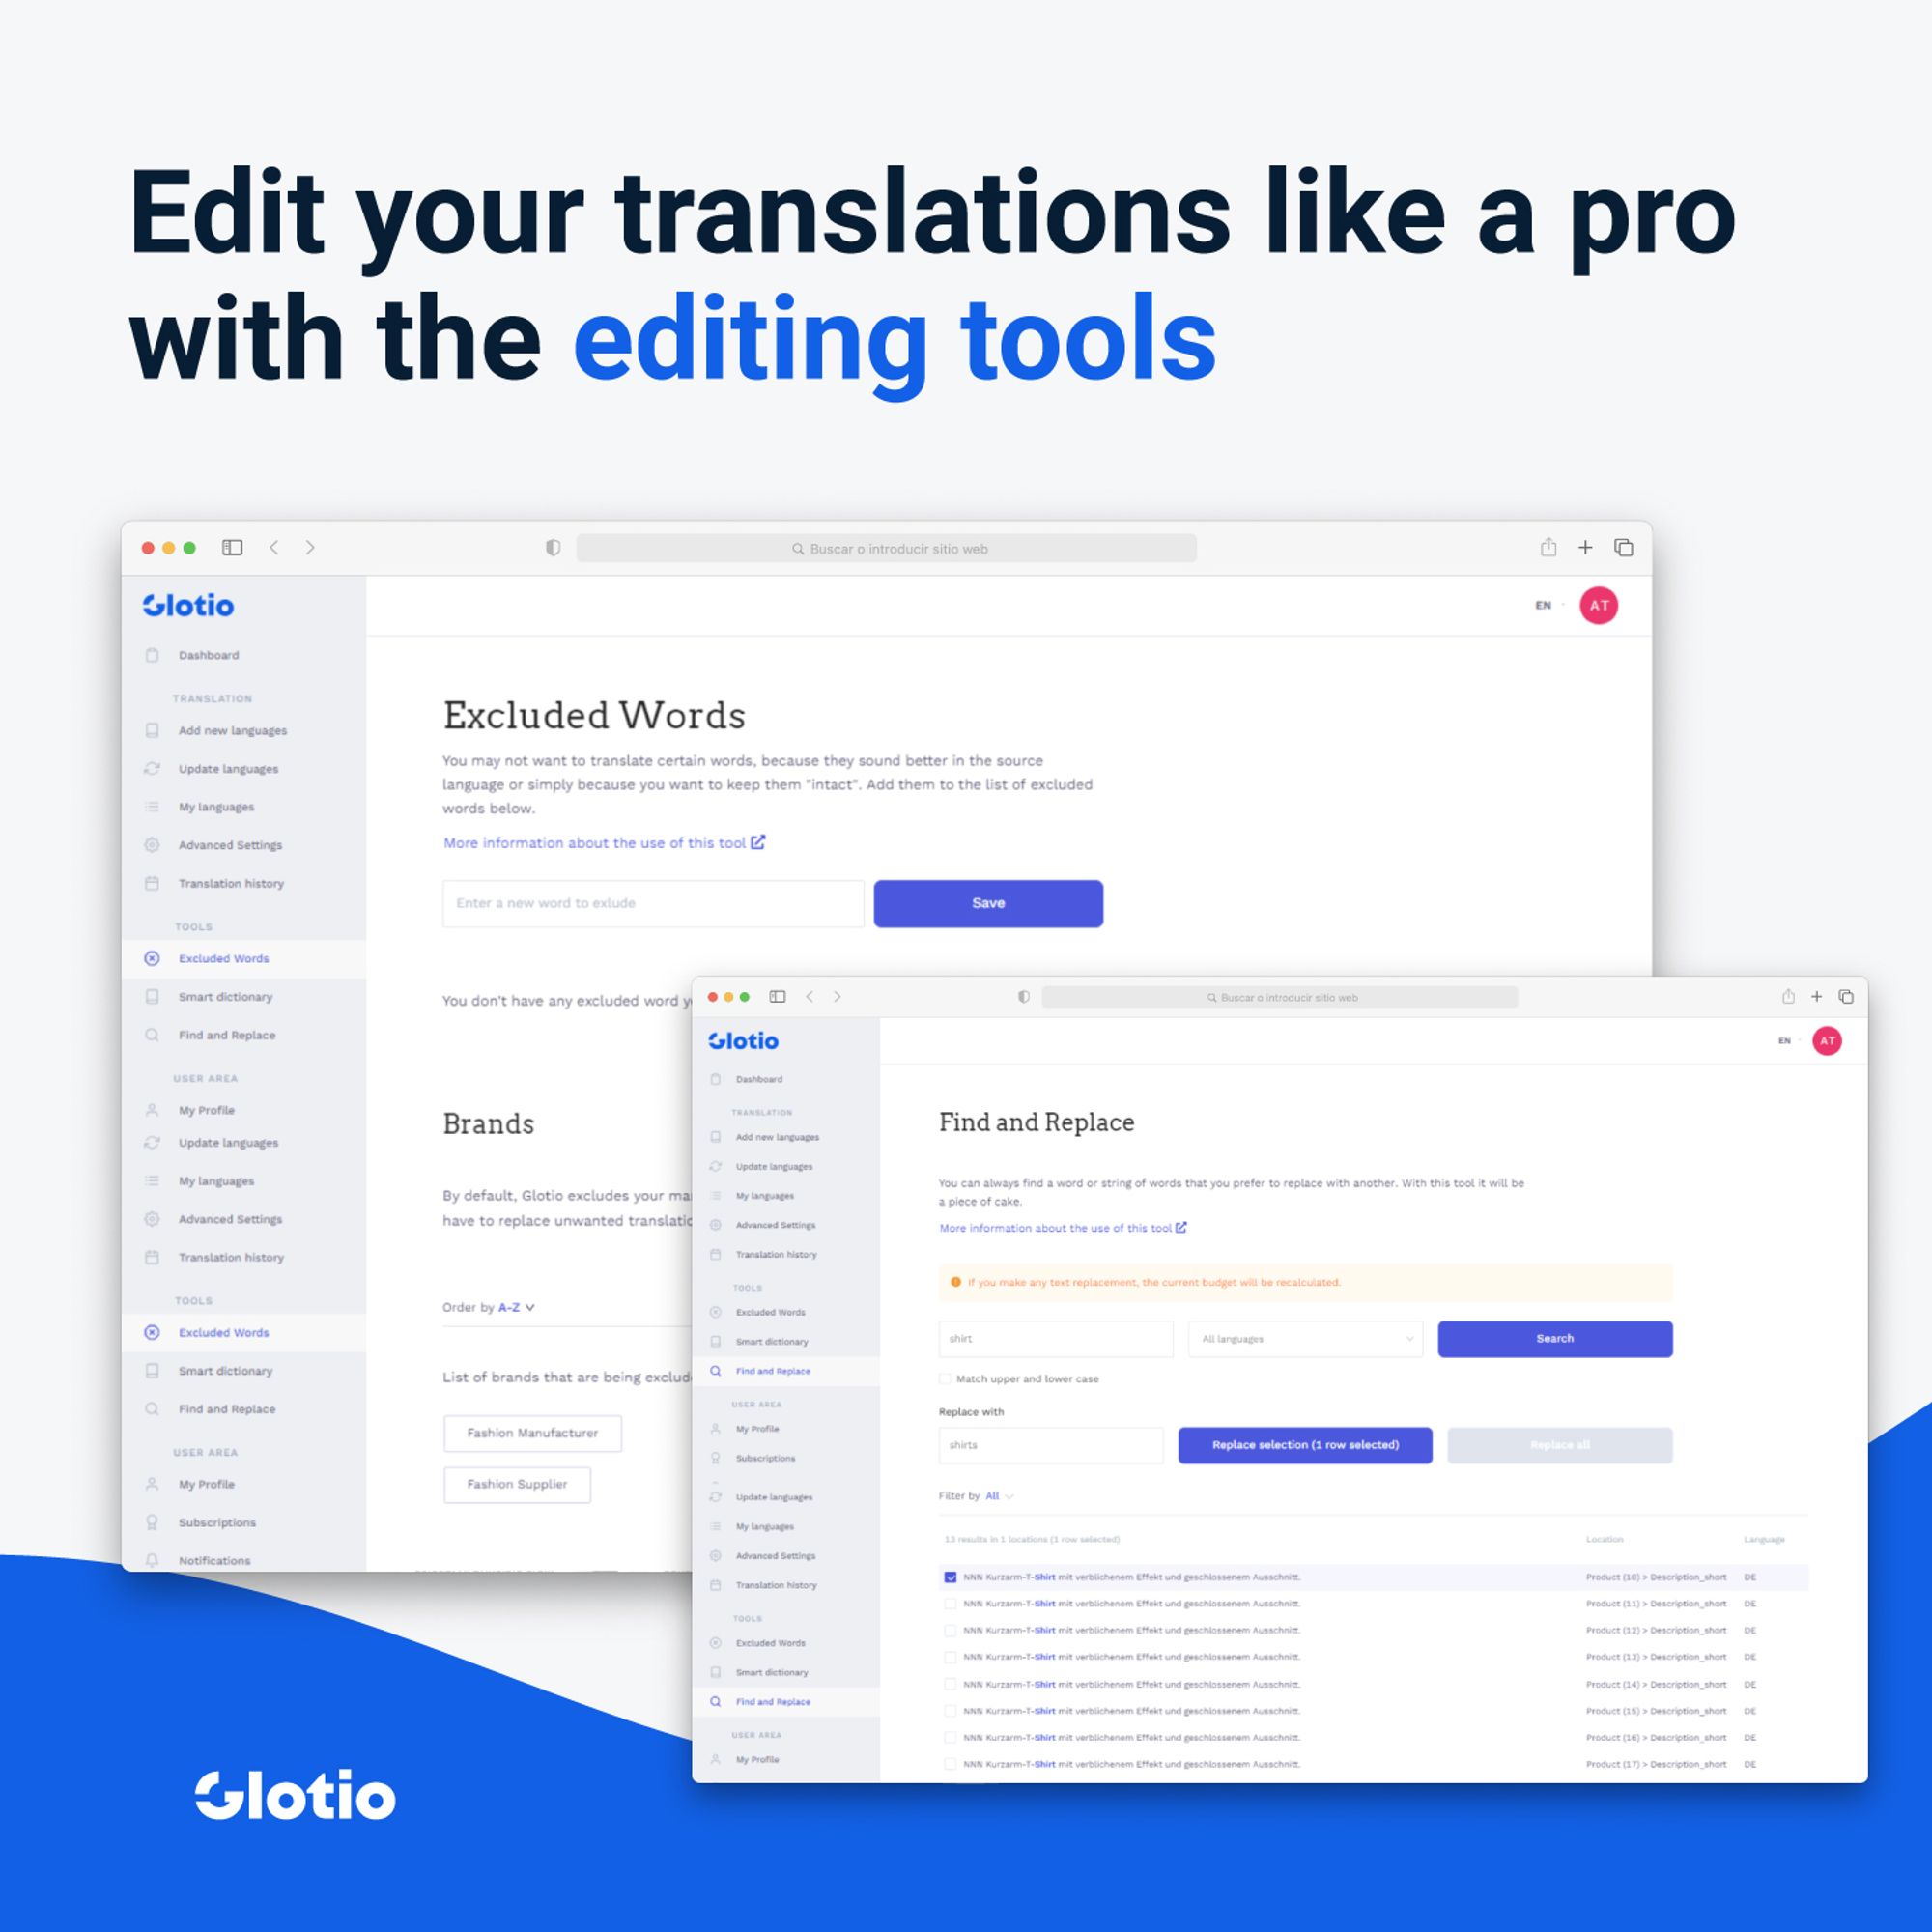 You can edit your translations like a professional thanks to the editing tools